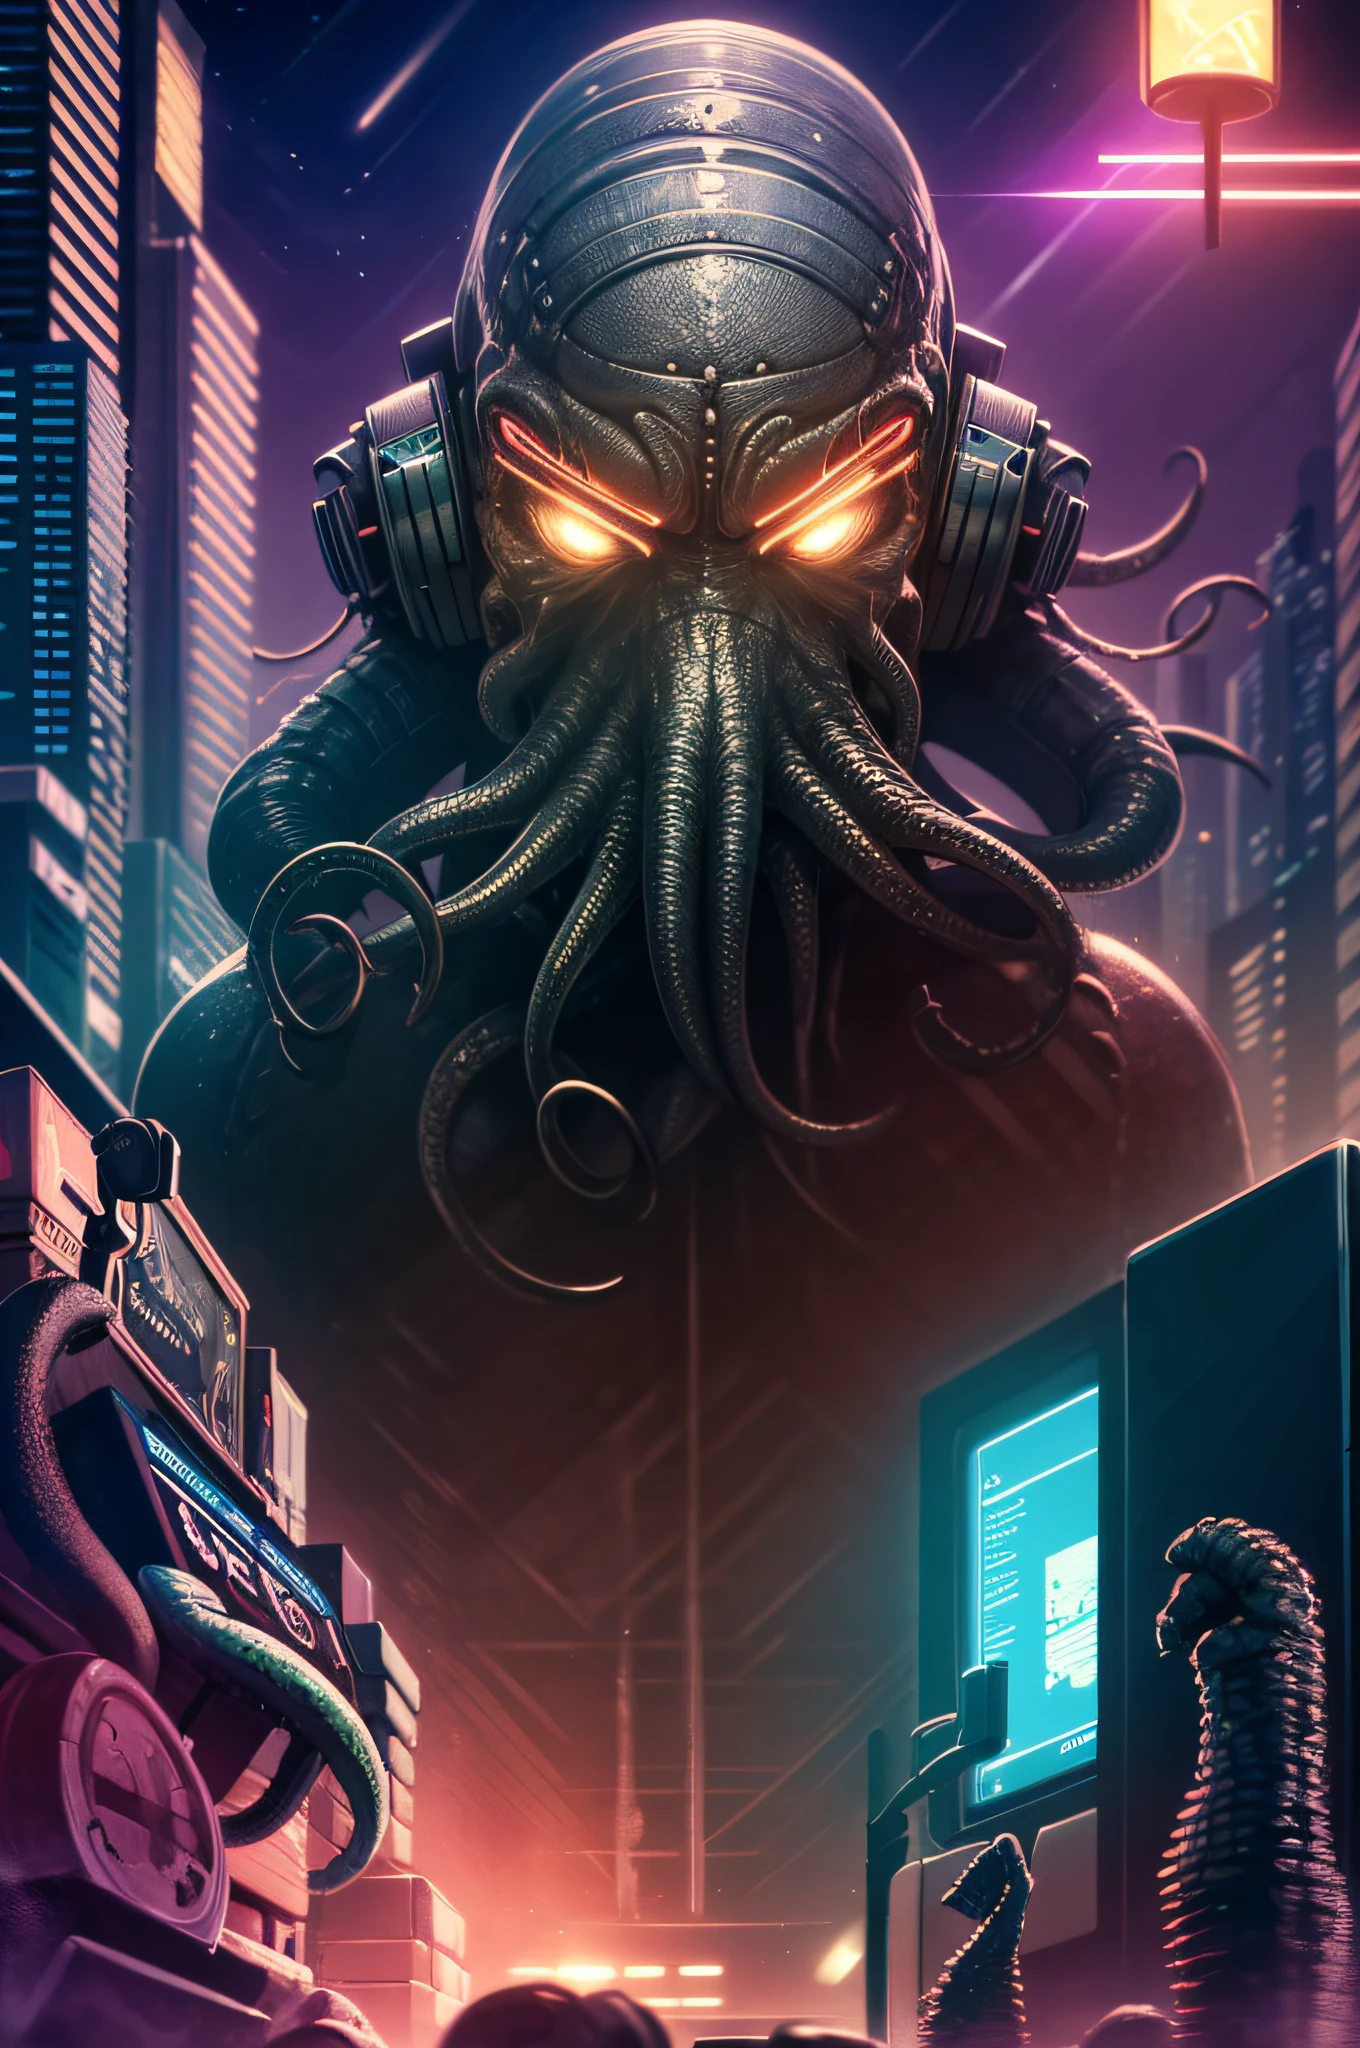 Cthulhu, as a cyborg, cyberpunk style, wearing headphones, listening to ipod,  best quality, futuristic city scene, night time, lovecraftian, red light district, highly detailed, bladerunner